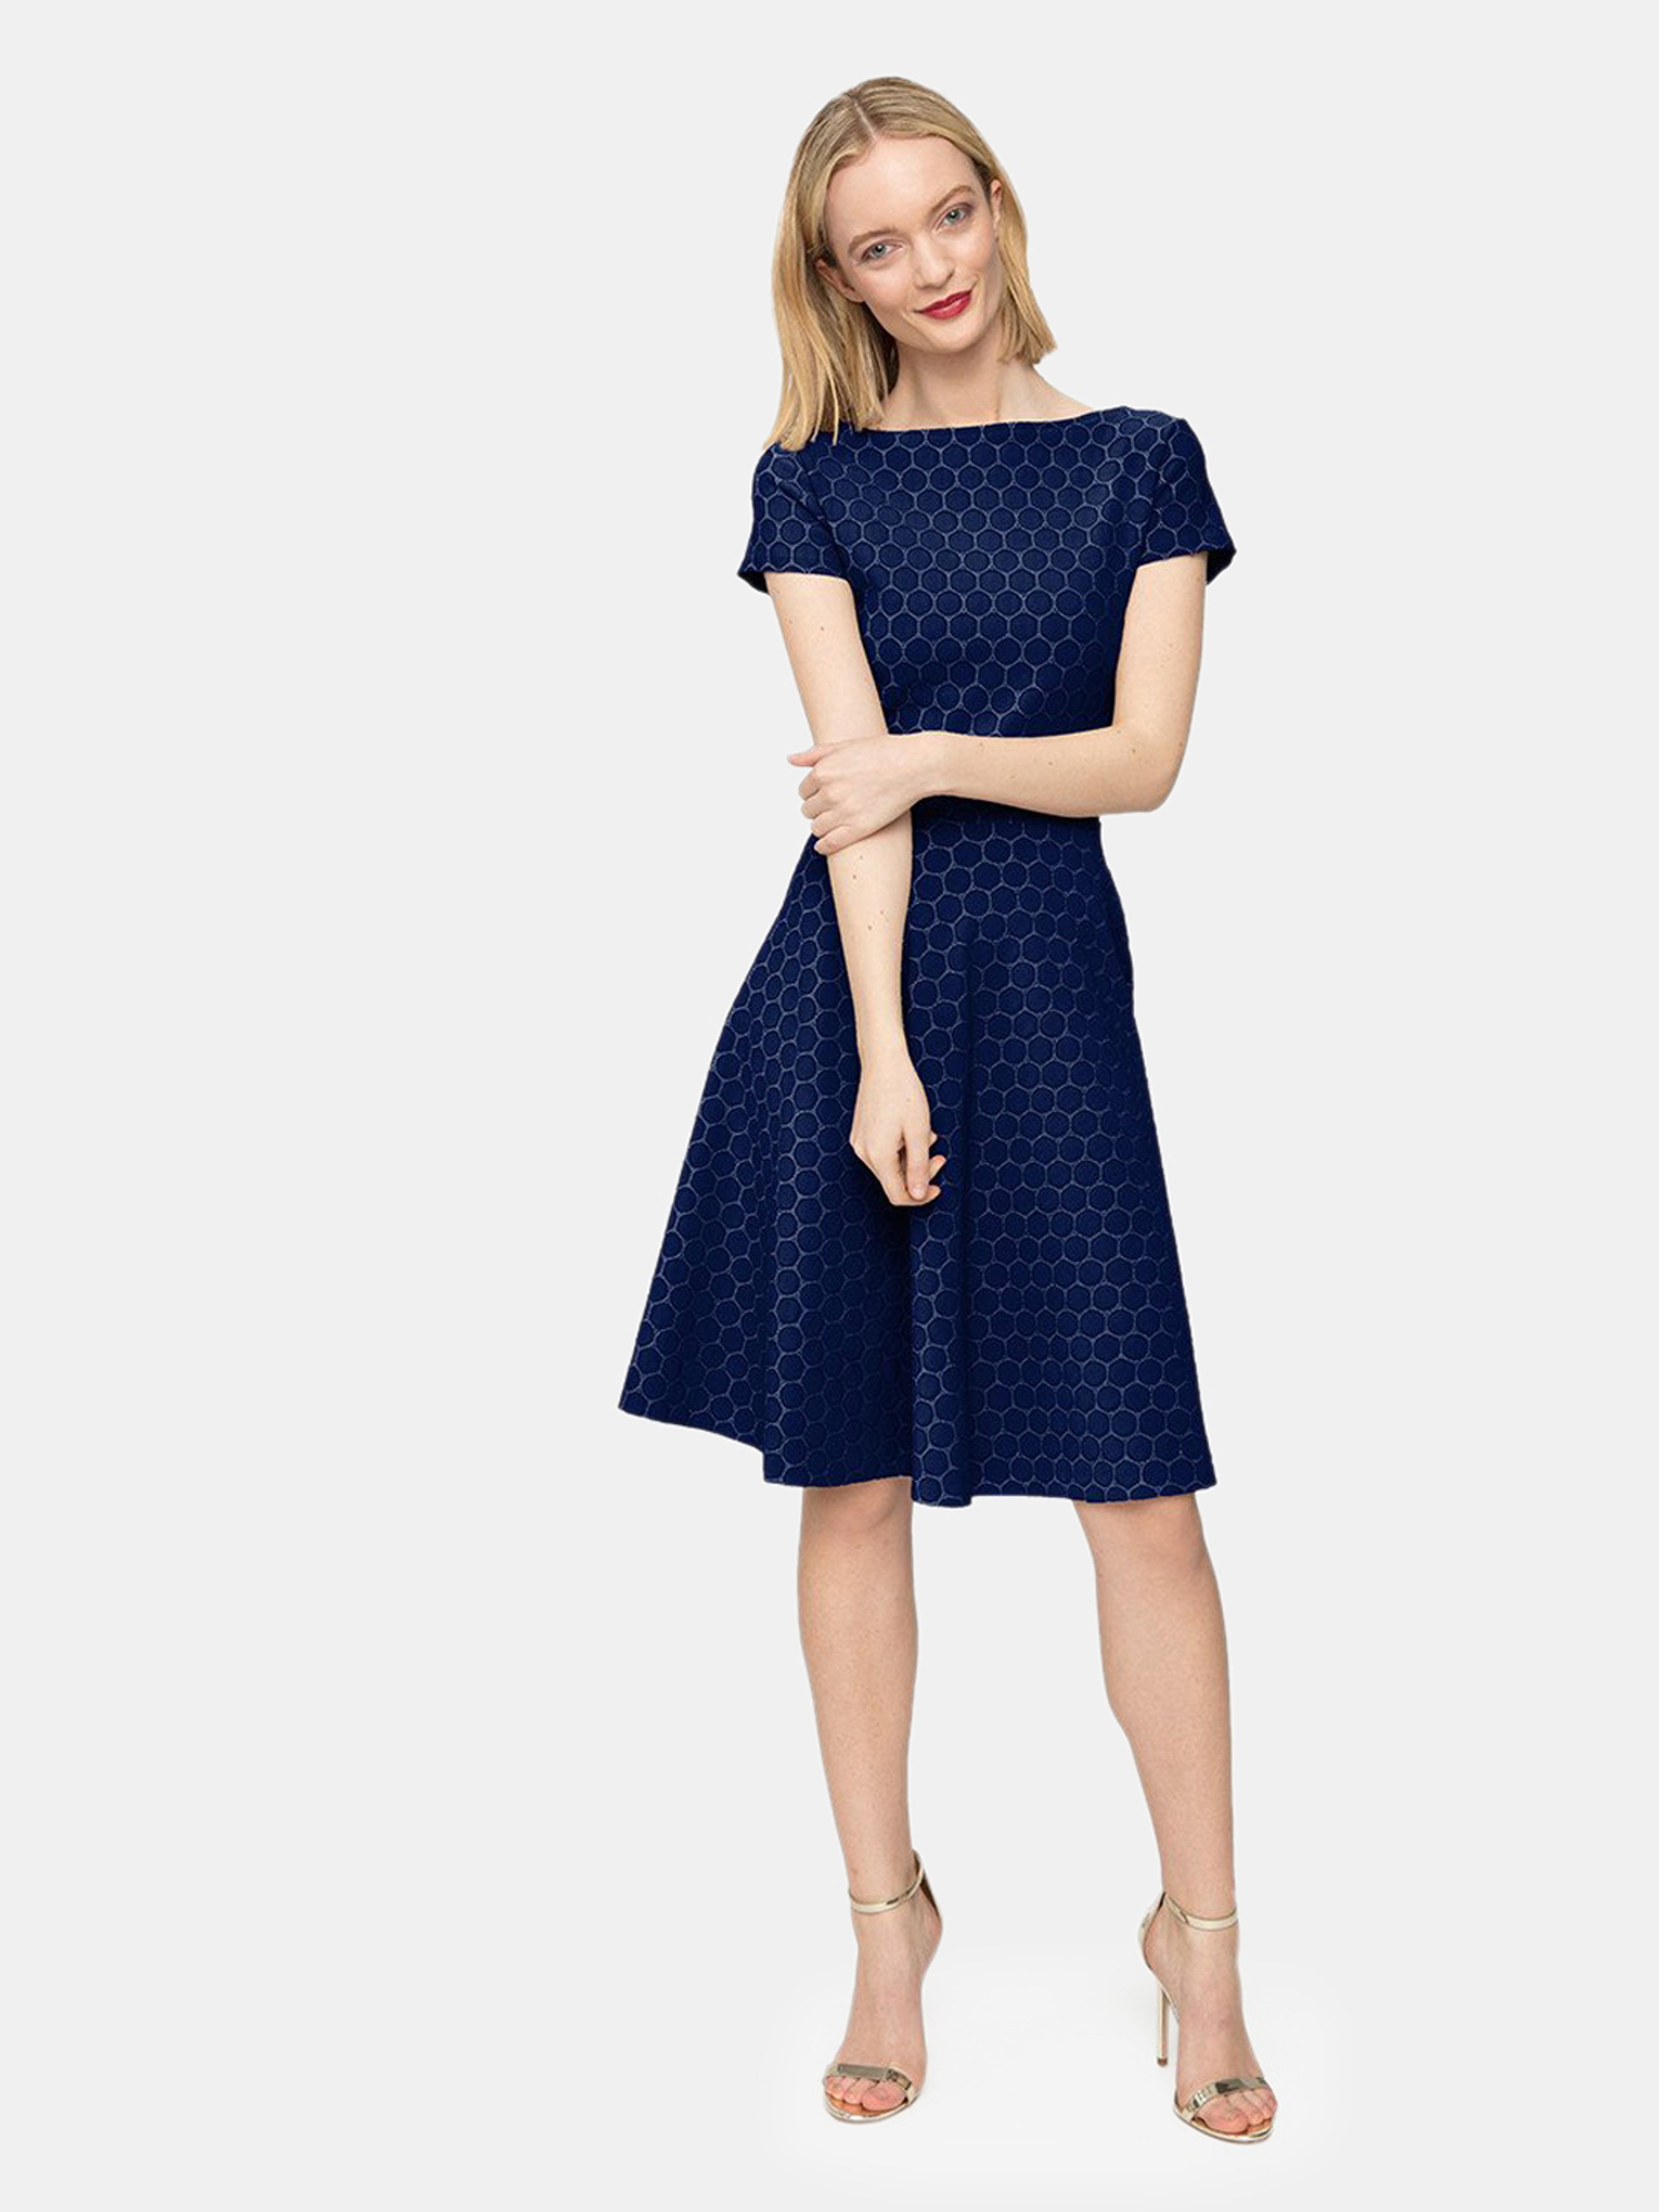 Leota Cap Sleeve A-line Dress In Classic Navy Luxe Jacquard Blue